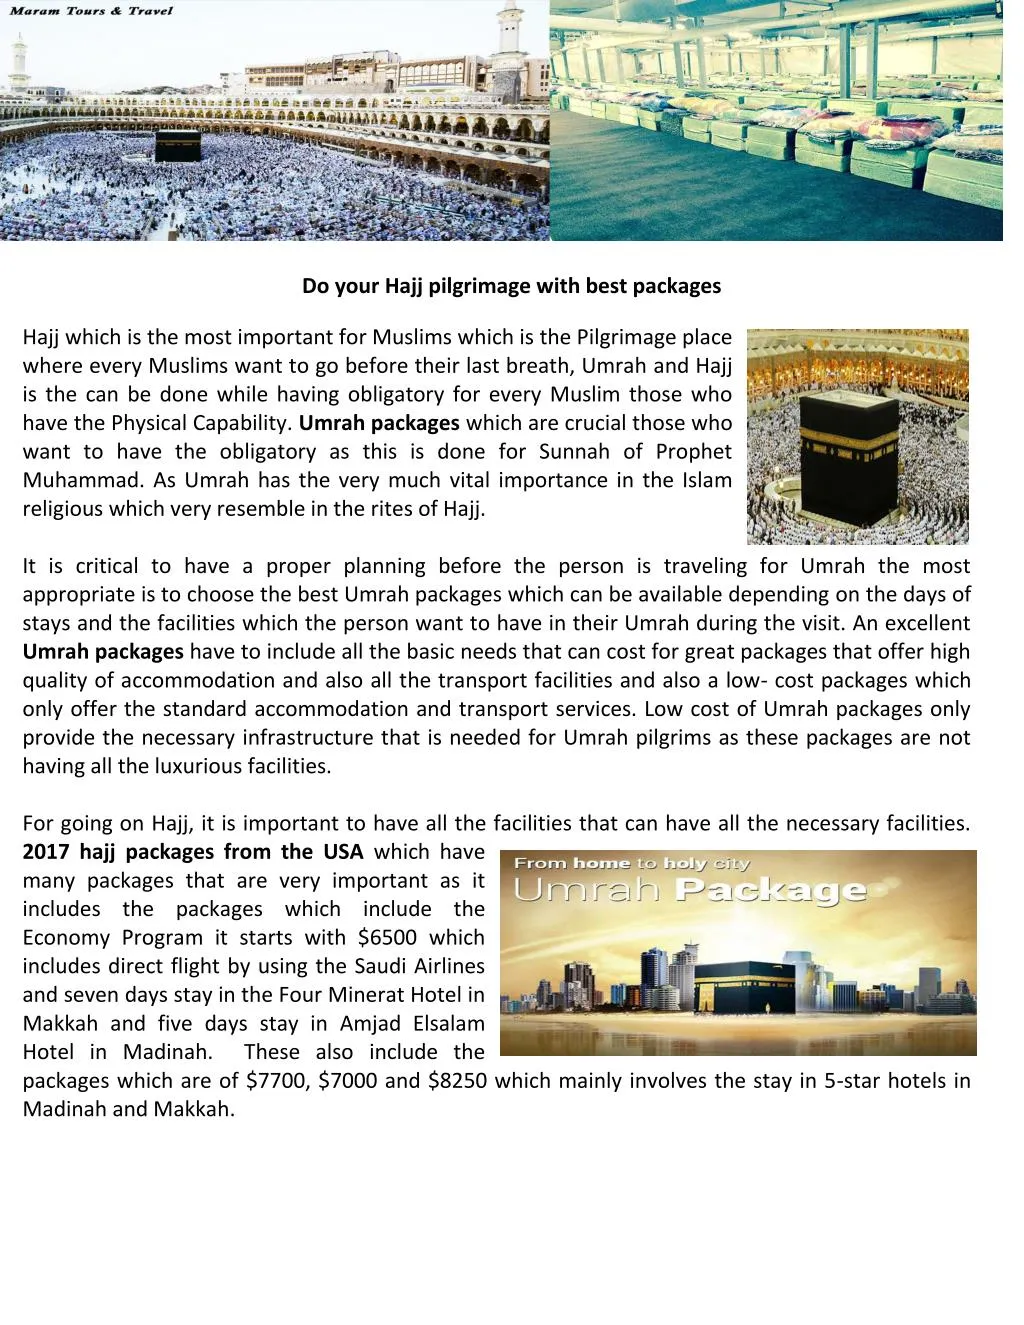 do your hajj pilgrimage with best packages